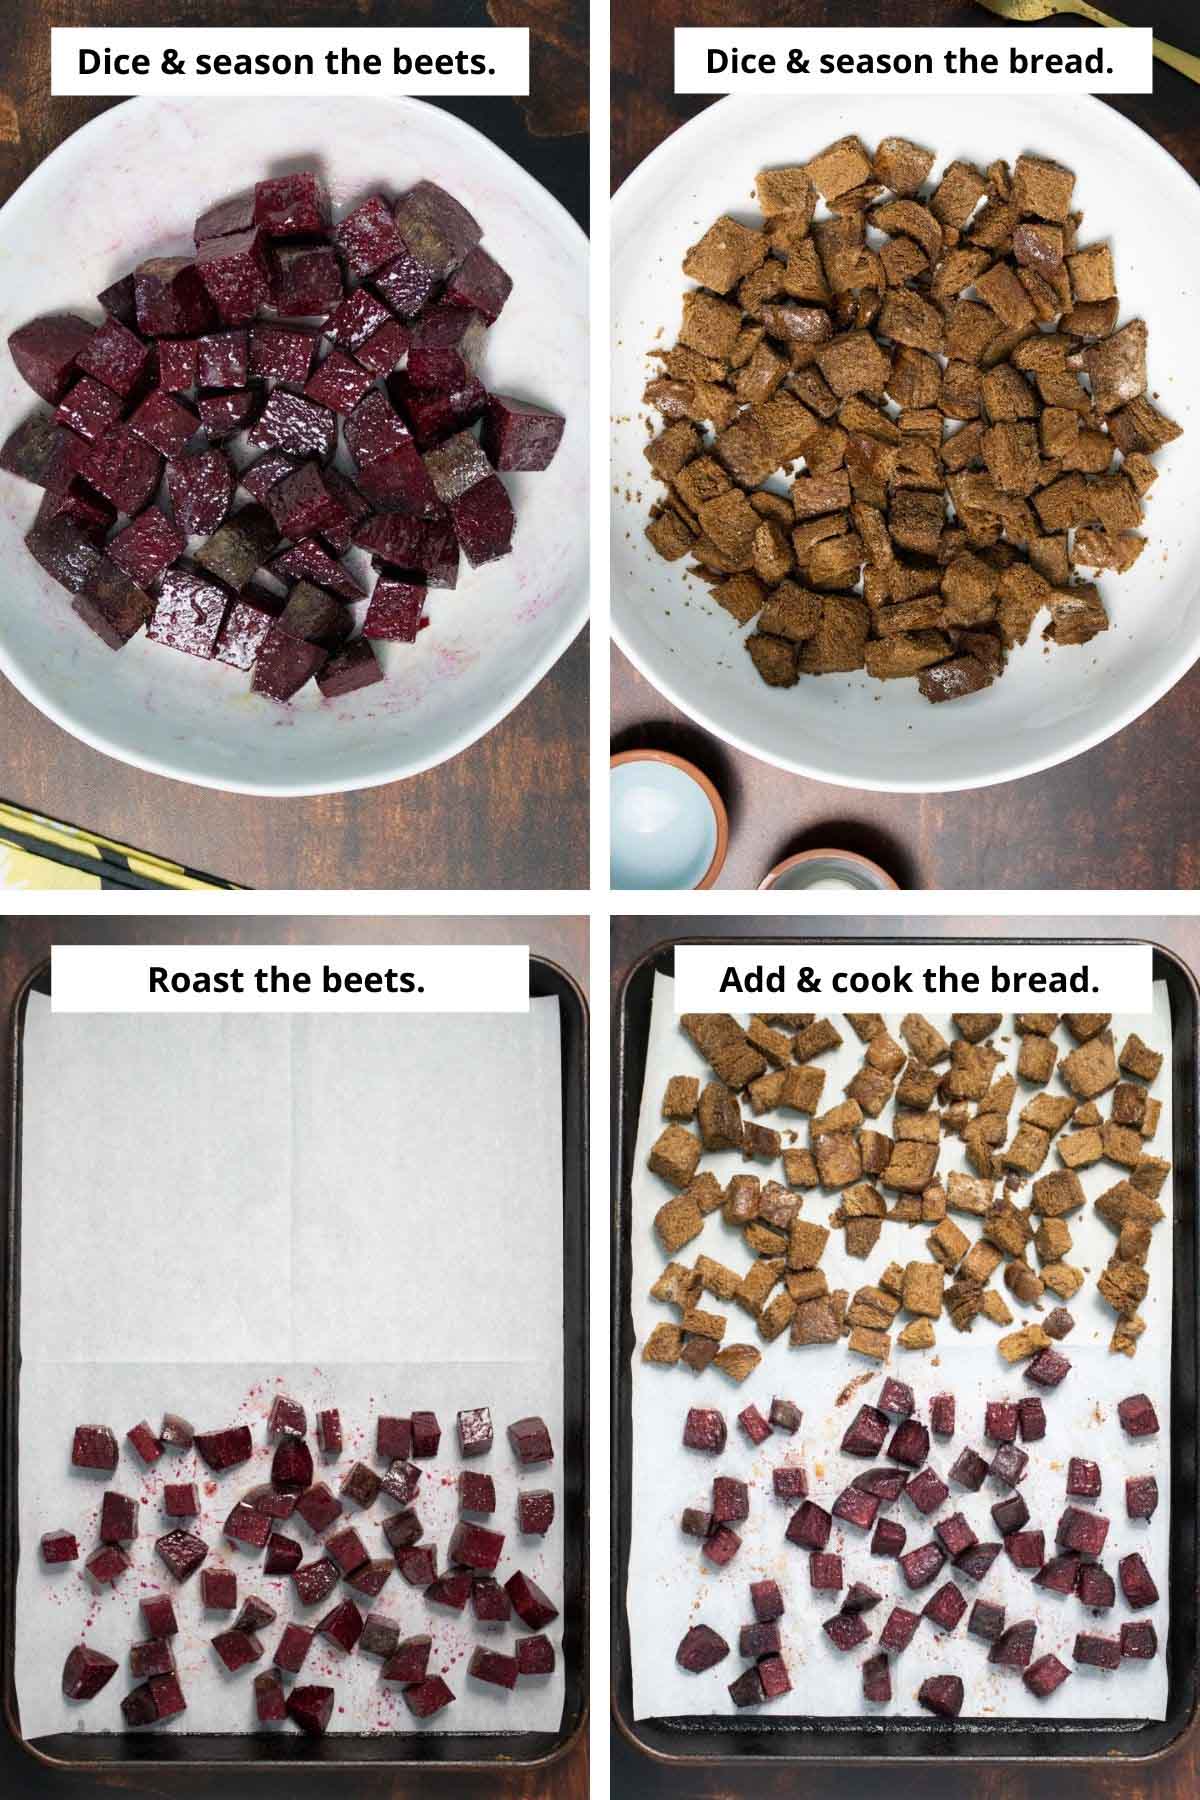 image collage of diced beets, diced dark rye bread, and the beets and bread on the roasting pan